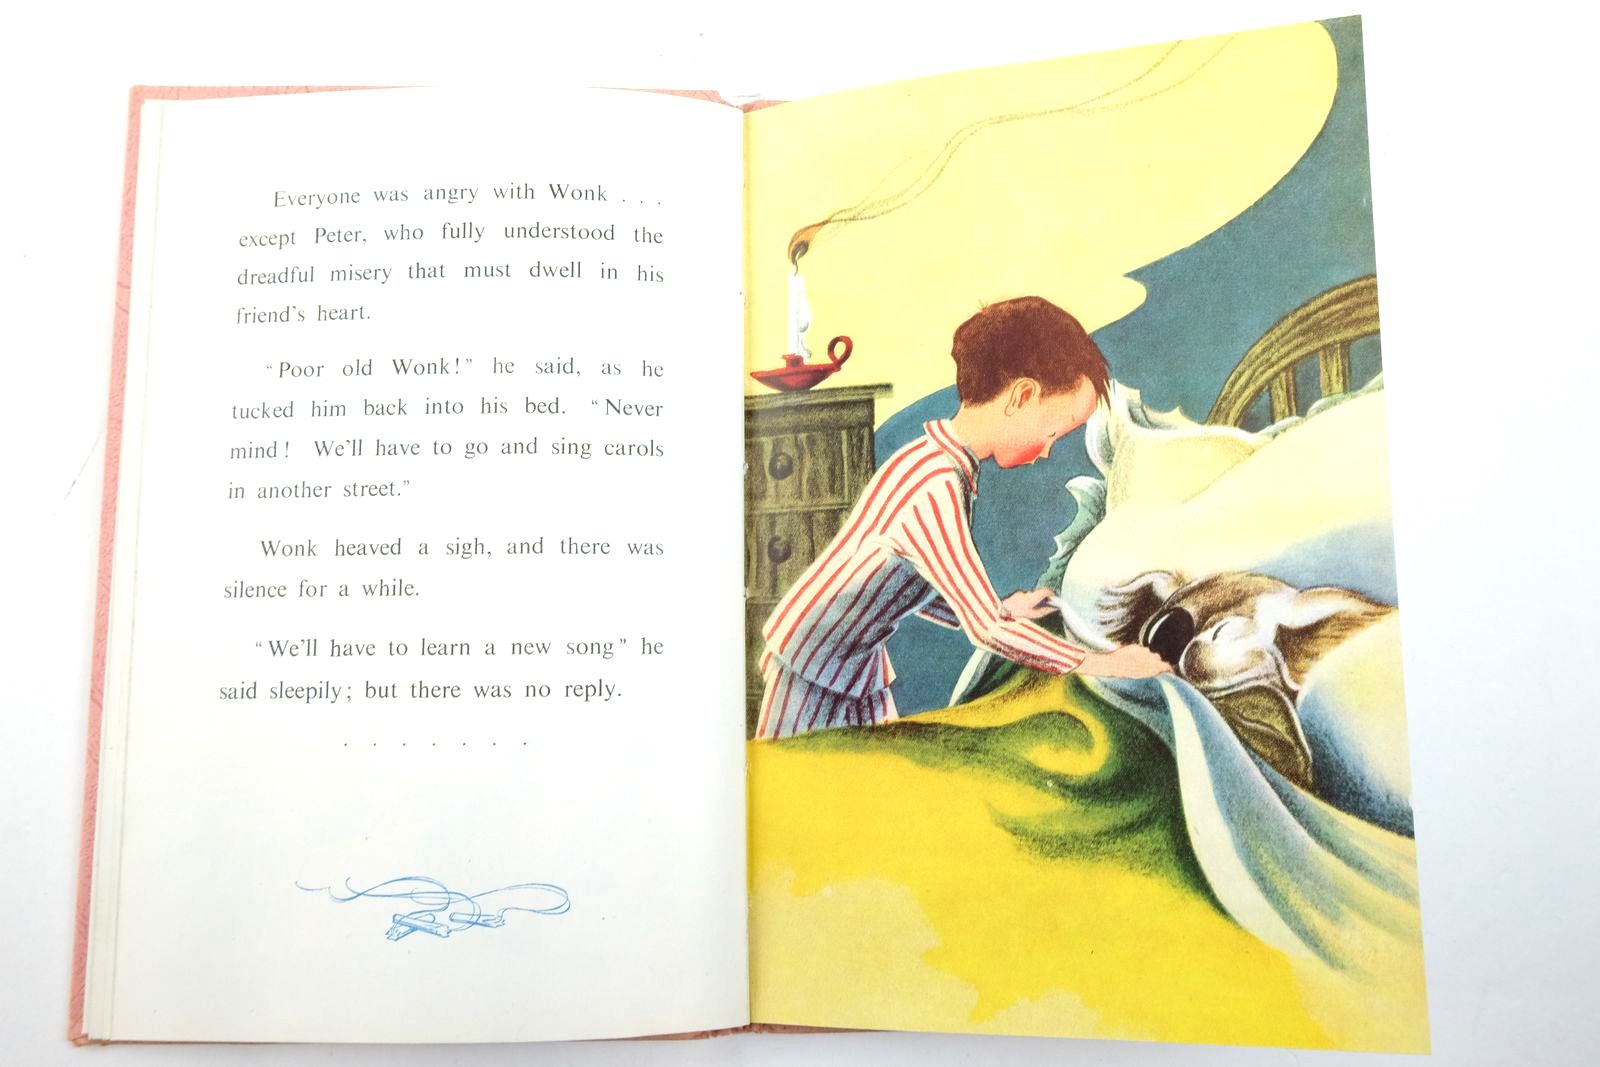 Photo of THE ADVENTURES OF WONK - FIREWORKS written by Levy, Muriel illustrated by Kiddell-Monroe, Joan published by Wills & Hepworth Ltd. (STOCK CODE: 2136915)  for sale by Stella & Rose's Books